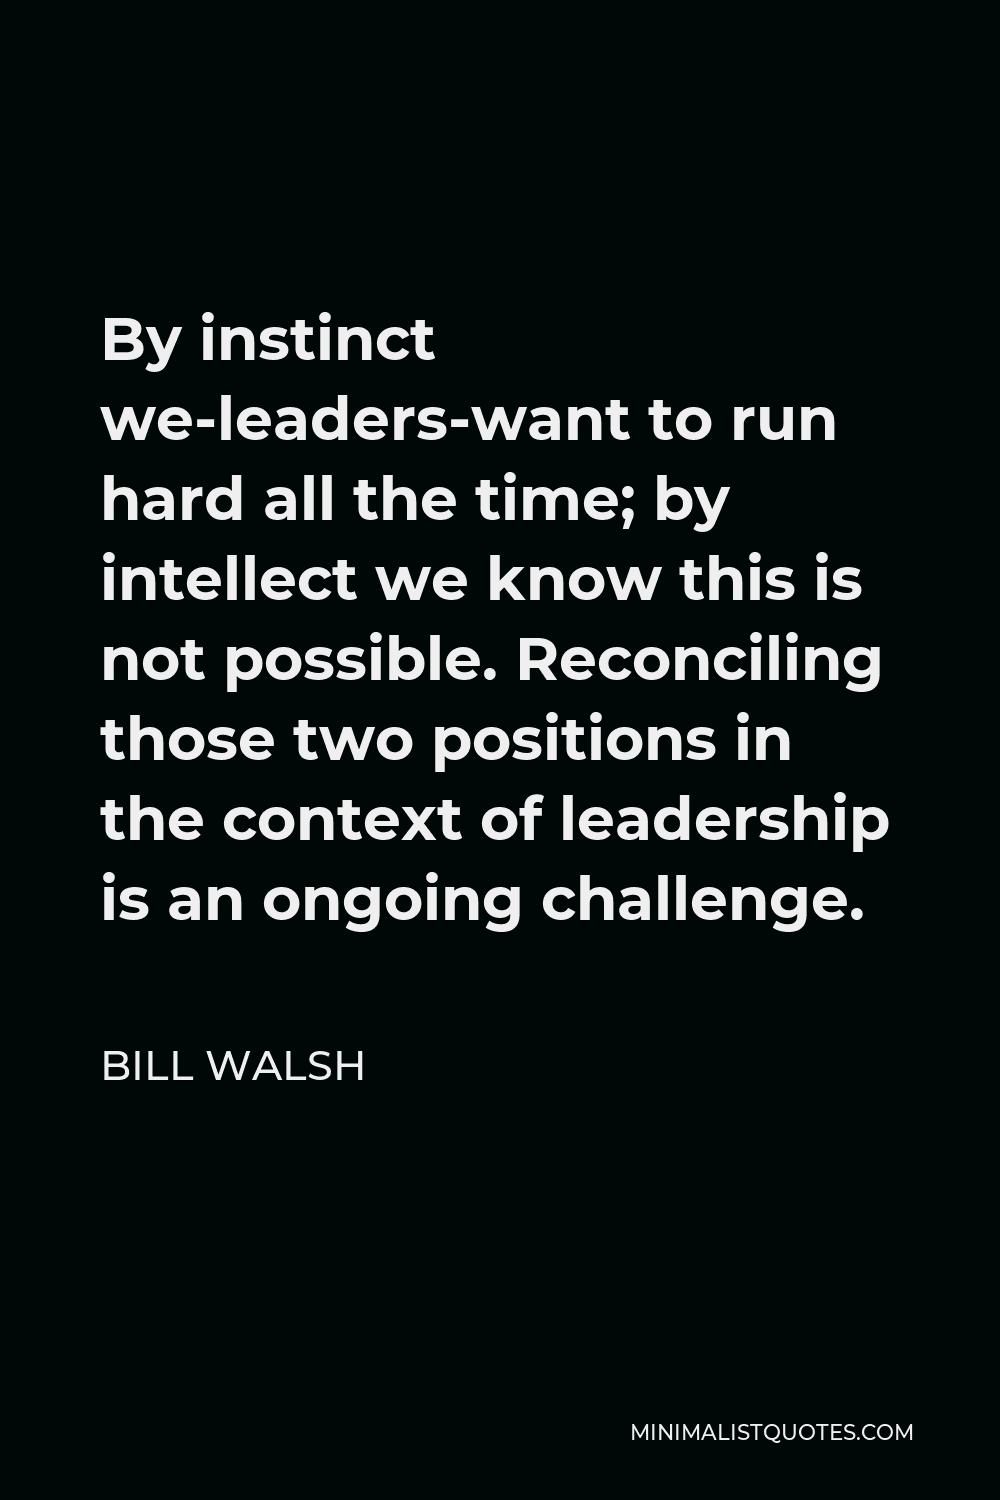 Bill Walsh Quote - By instinct we-leaders-want to run hard all the time; by intellect we know this is not possible. Reconciling those two positions in the context of leadership is an ongoing challenge.